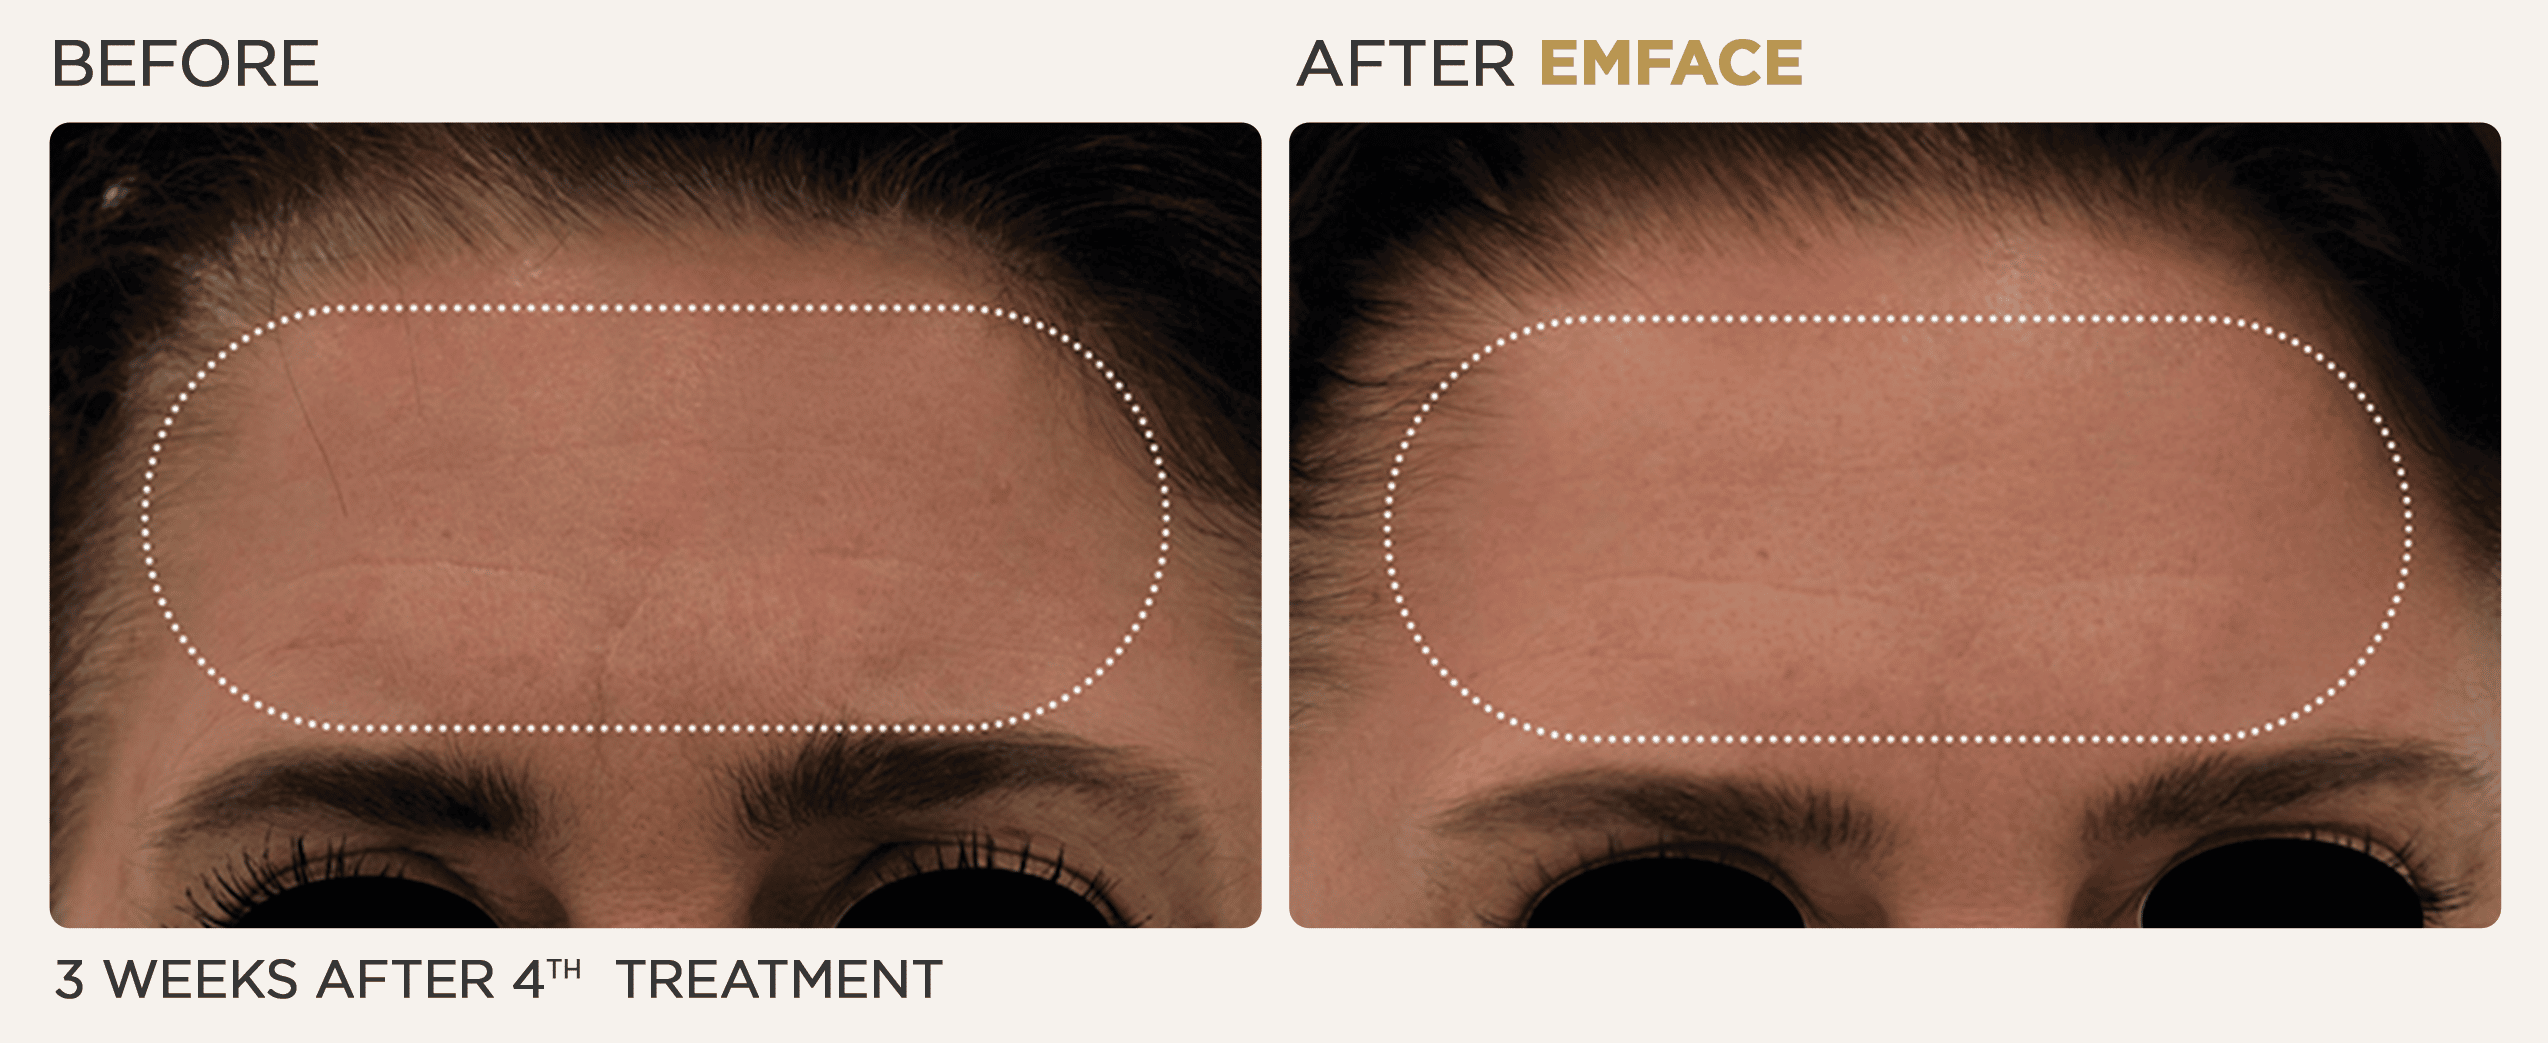 Woman's forehead showing before and after results from EMface treatment at Vitalyc Medspa in Addison.